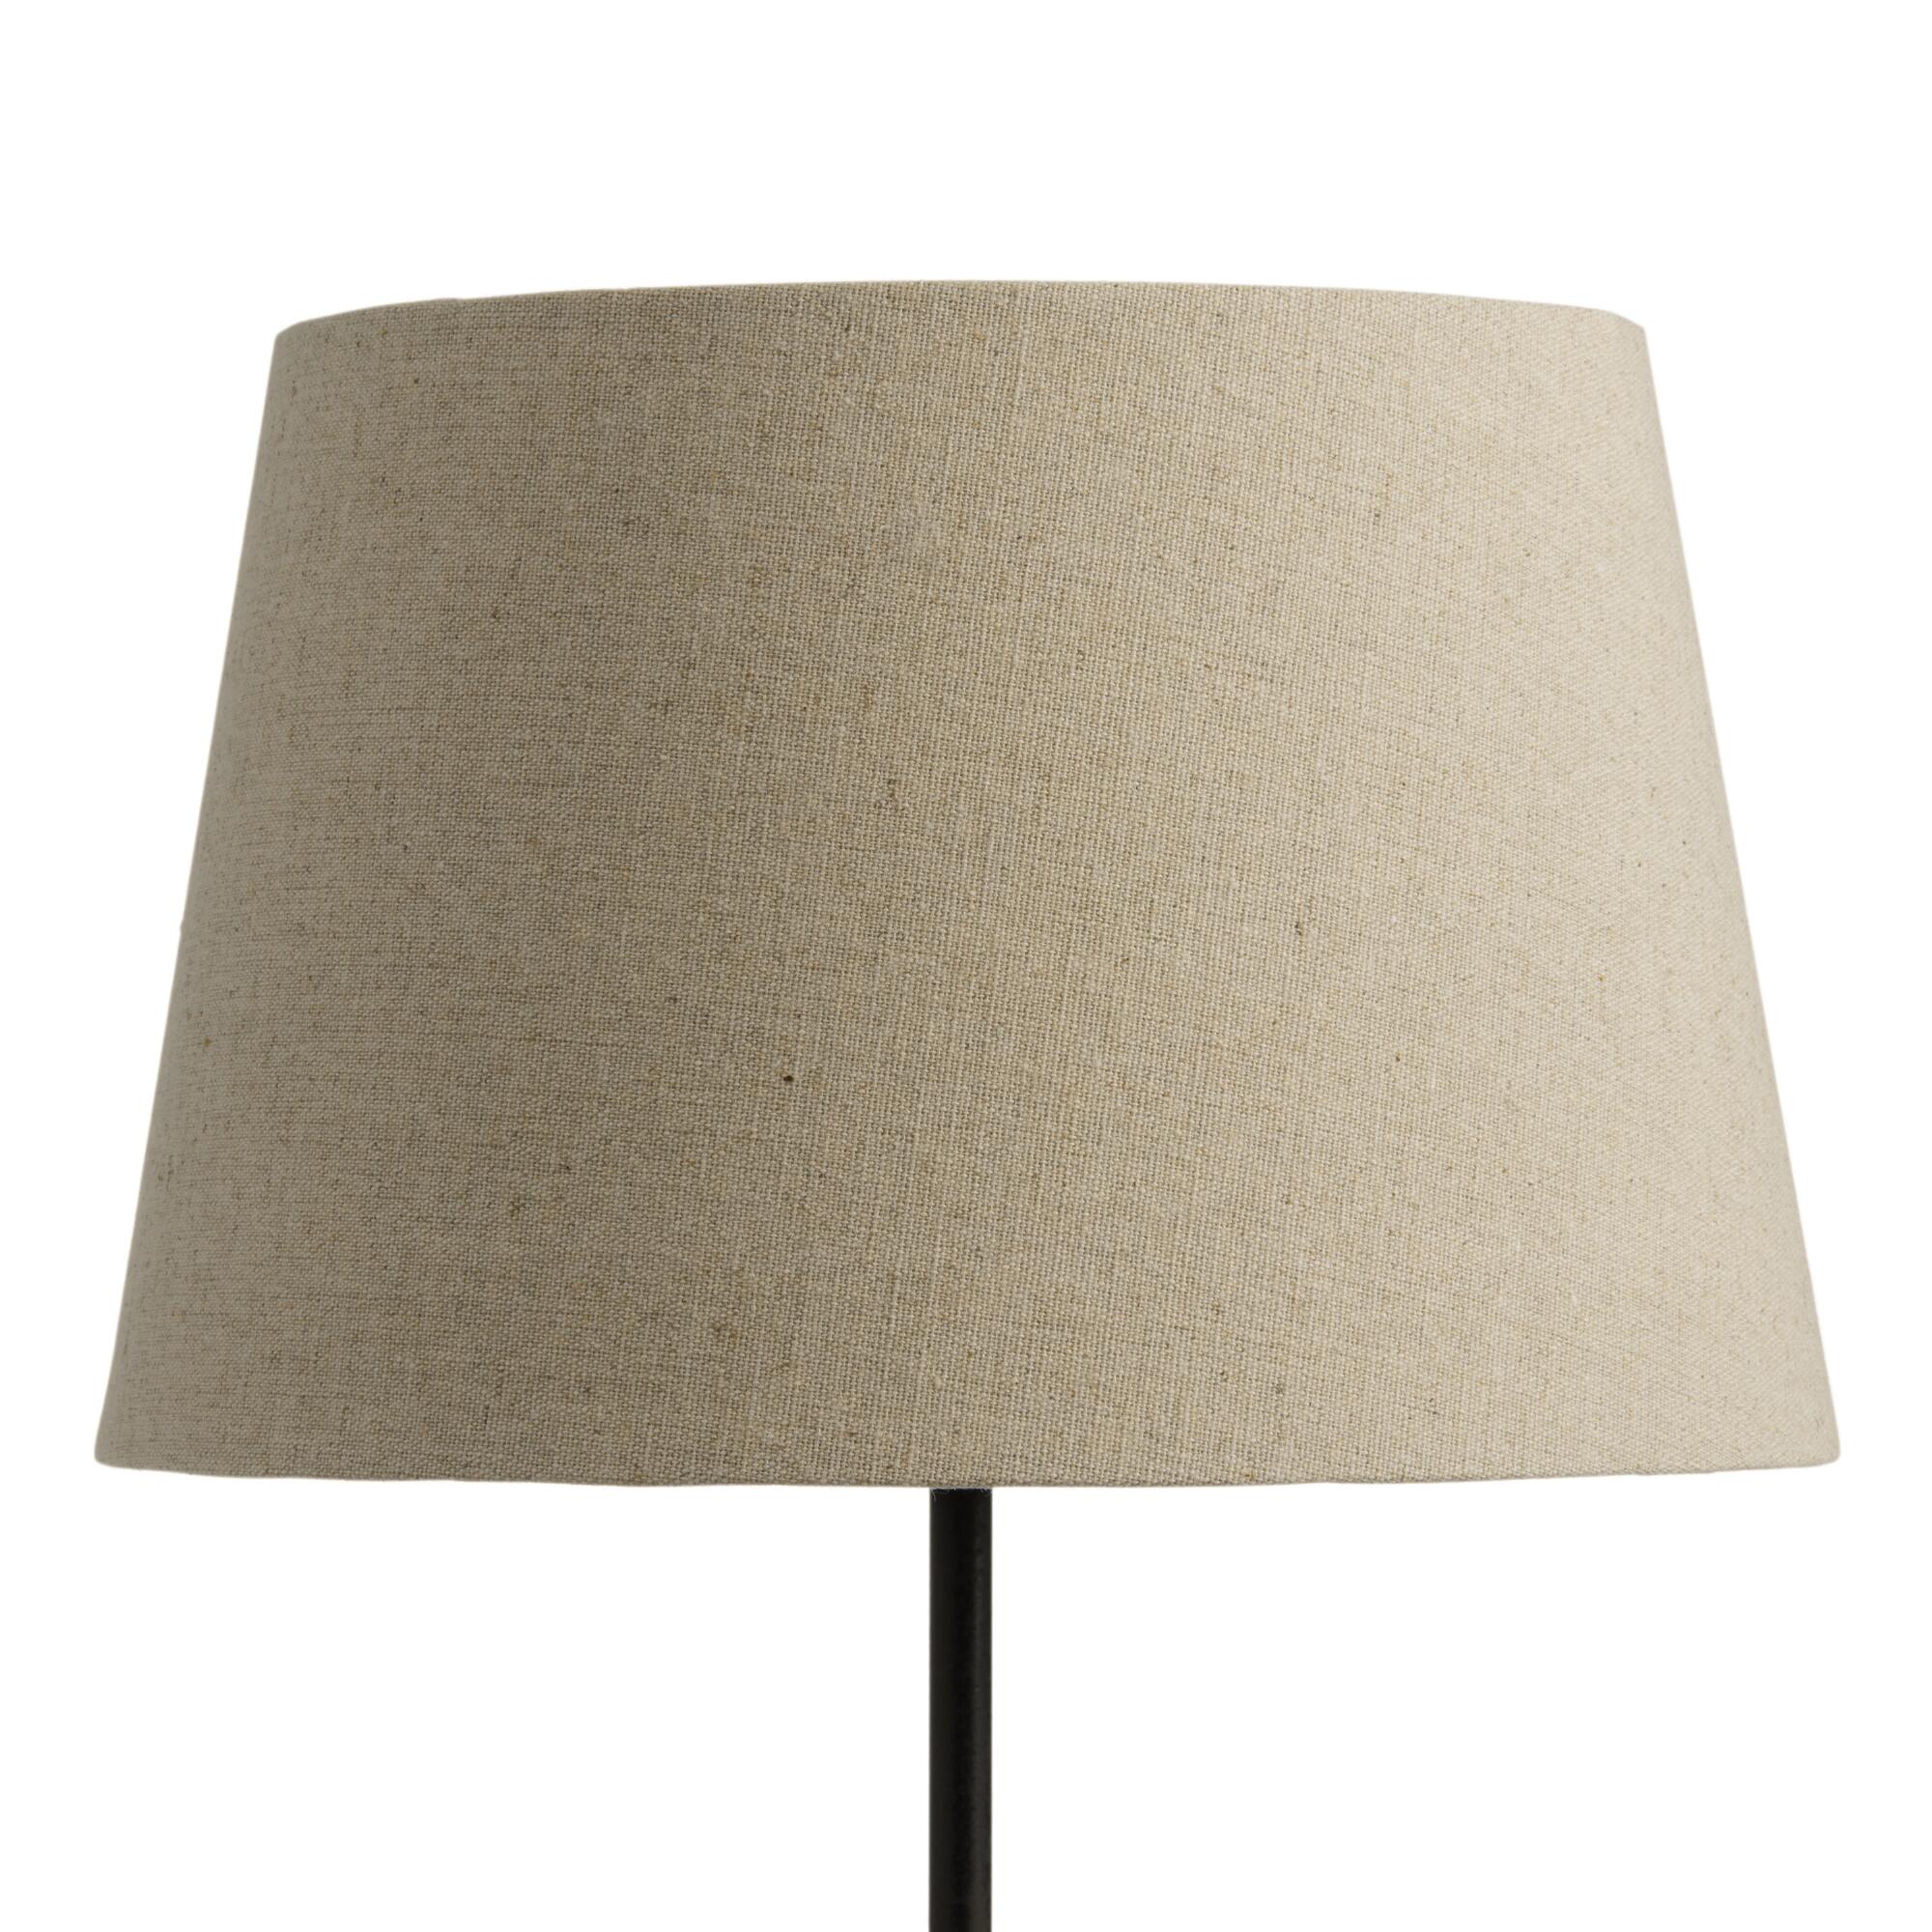 Natural Linen Accent Lamp Shade by World Market